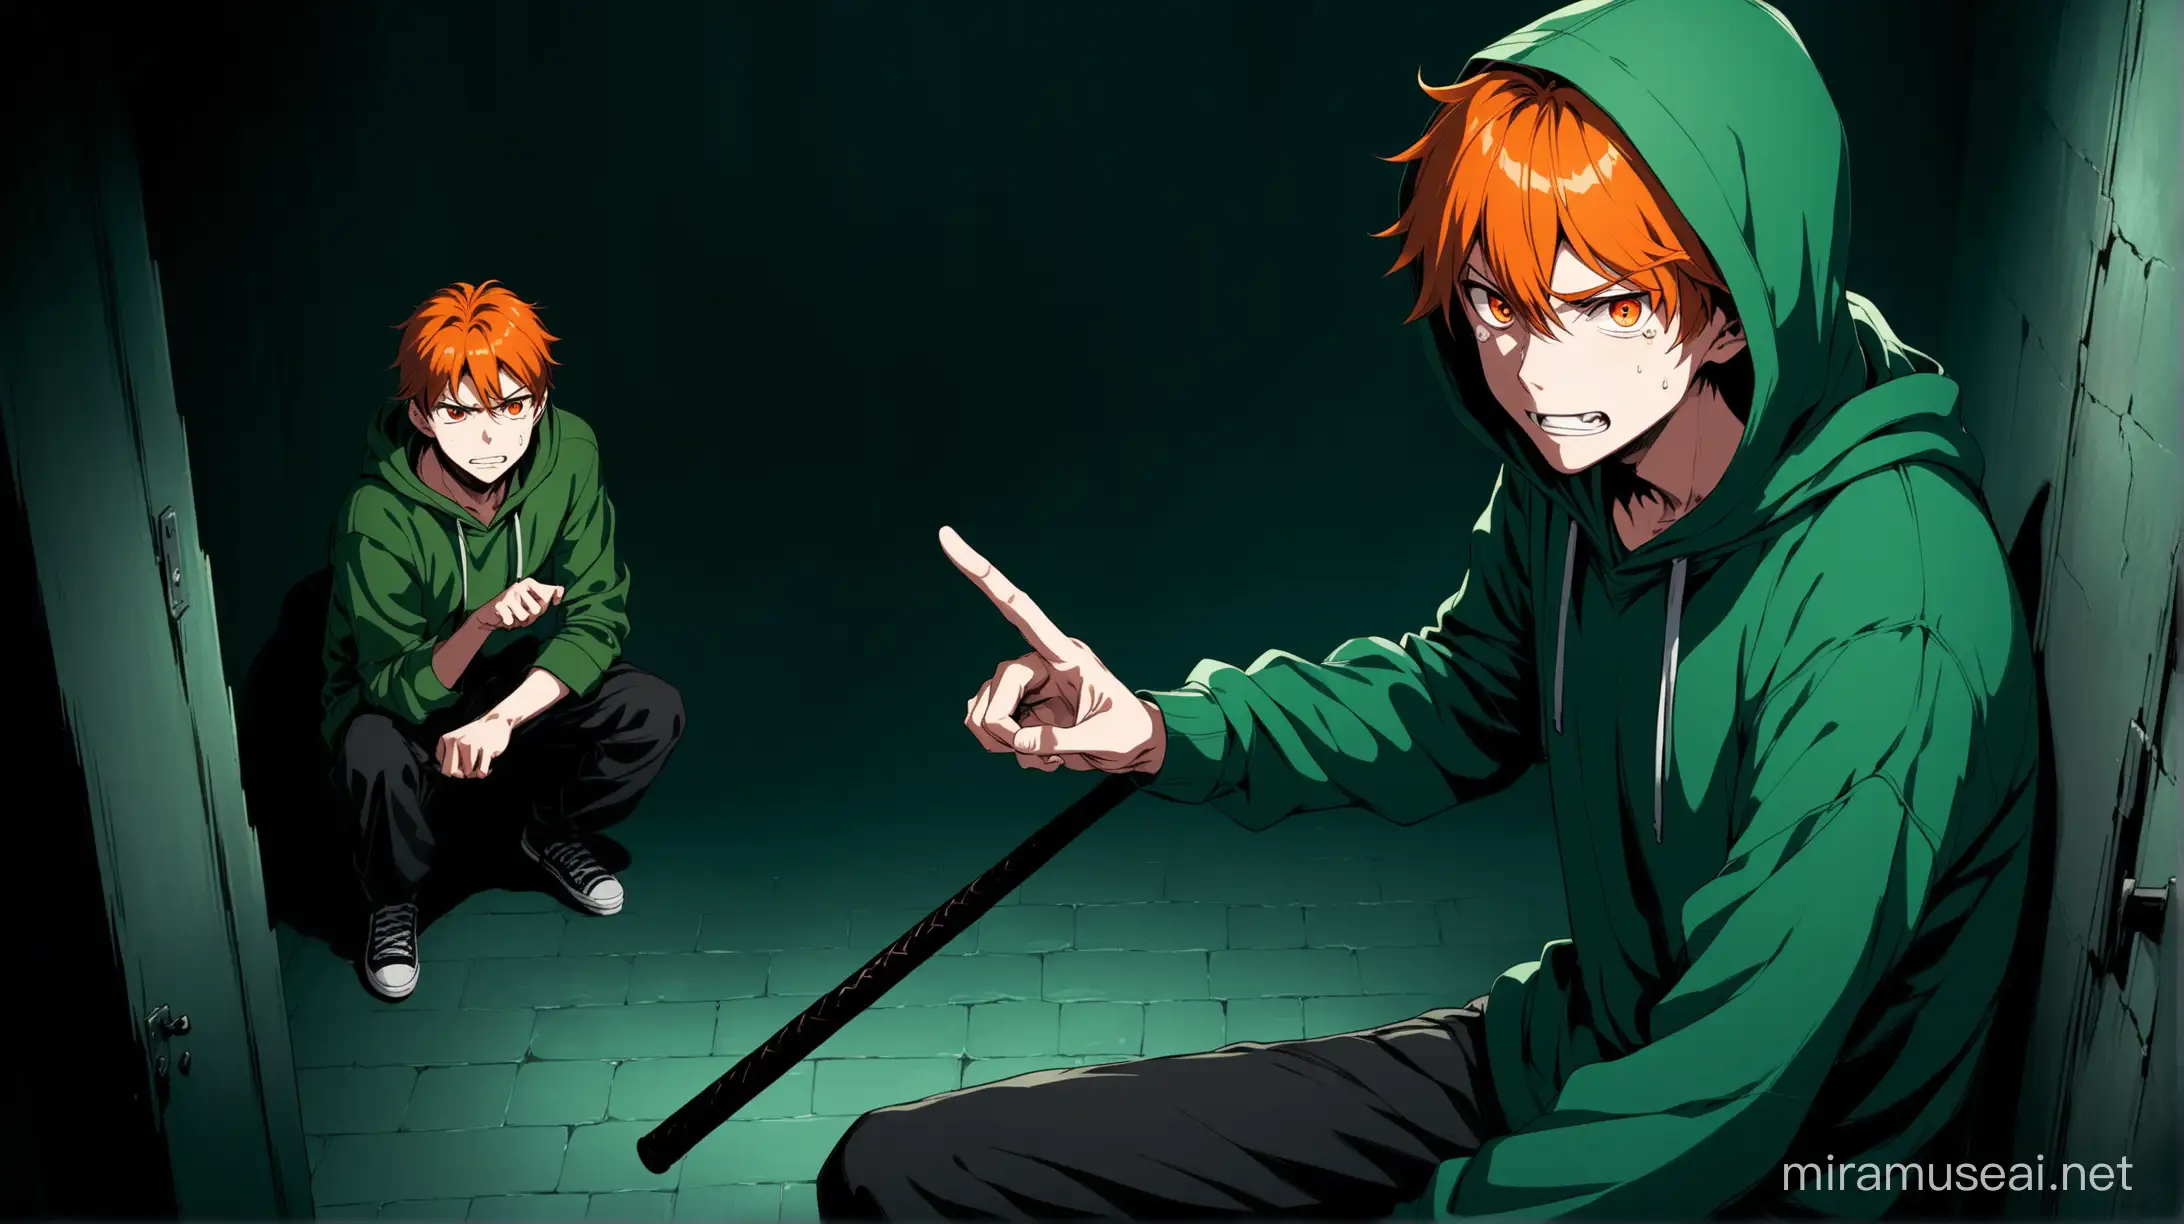 An image of an anime male evil criminal character who is pointing his index finger with his right hand and he is holding a baseball bat in his right hand. He is evil, criminal, red eyes, dark green headed, wearing dark green hoodie, dreadful smile. He is pointing at the dark place and a boy teenager beside sitting him in the floor in an underground secret room with dark green contrasts and vibe is staring at the dark place. The boy is handsome, crying, shocked, orange headed, orange eyes, wearing dark green hoodie